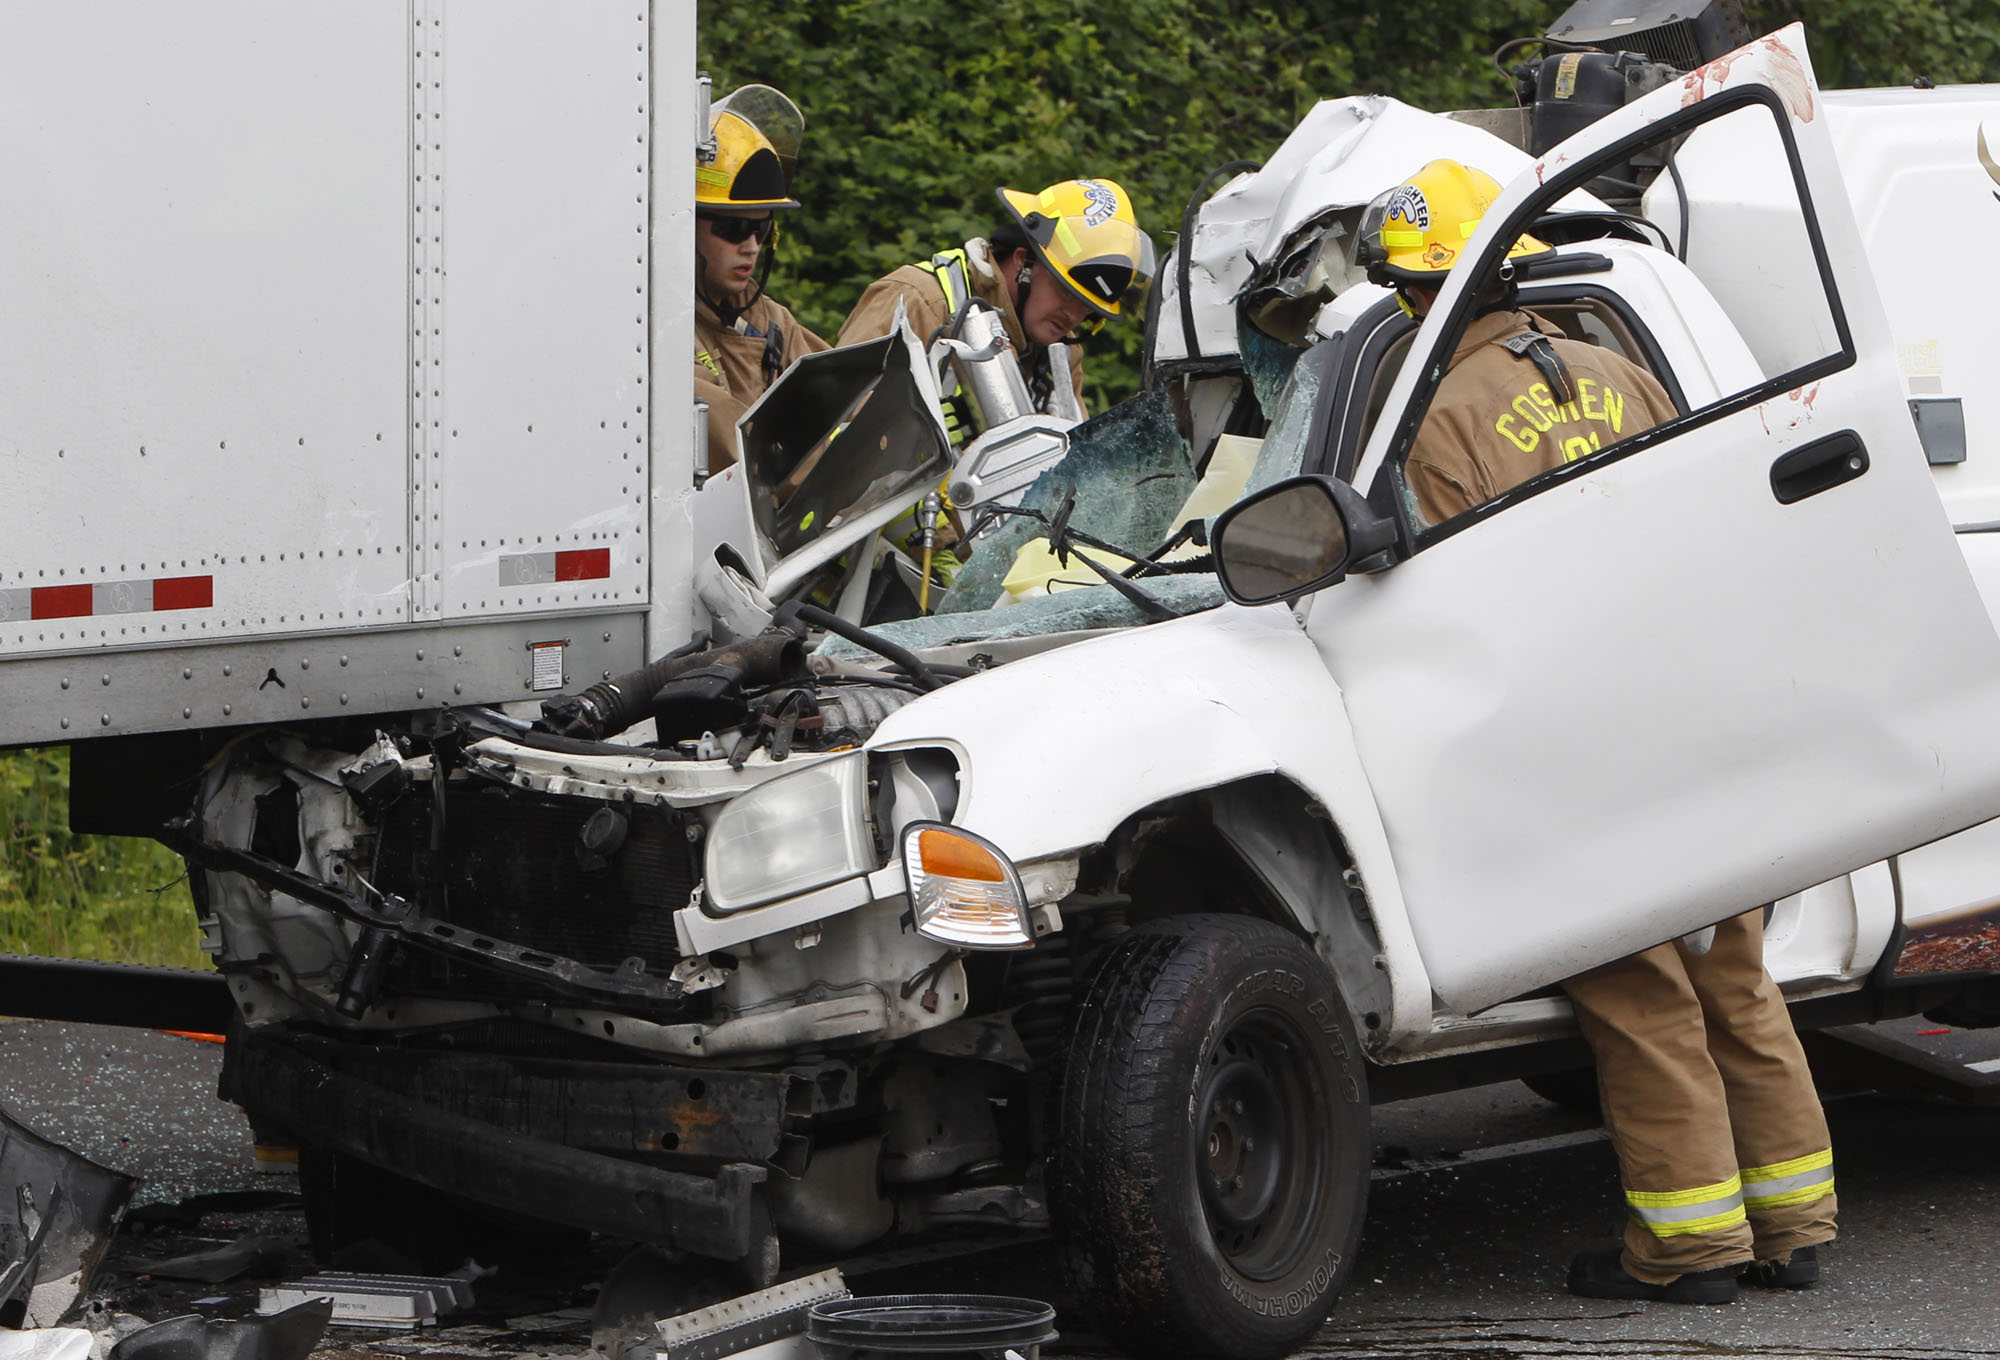 Personnel with the Goshen Fire Department work to extricate someone from a vehicle crash involving a pickup and a tractor-trailer in the southbound lanes of Interstate 5 near Highway 58 south of Eugene, Ore., on Tuesday.